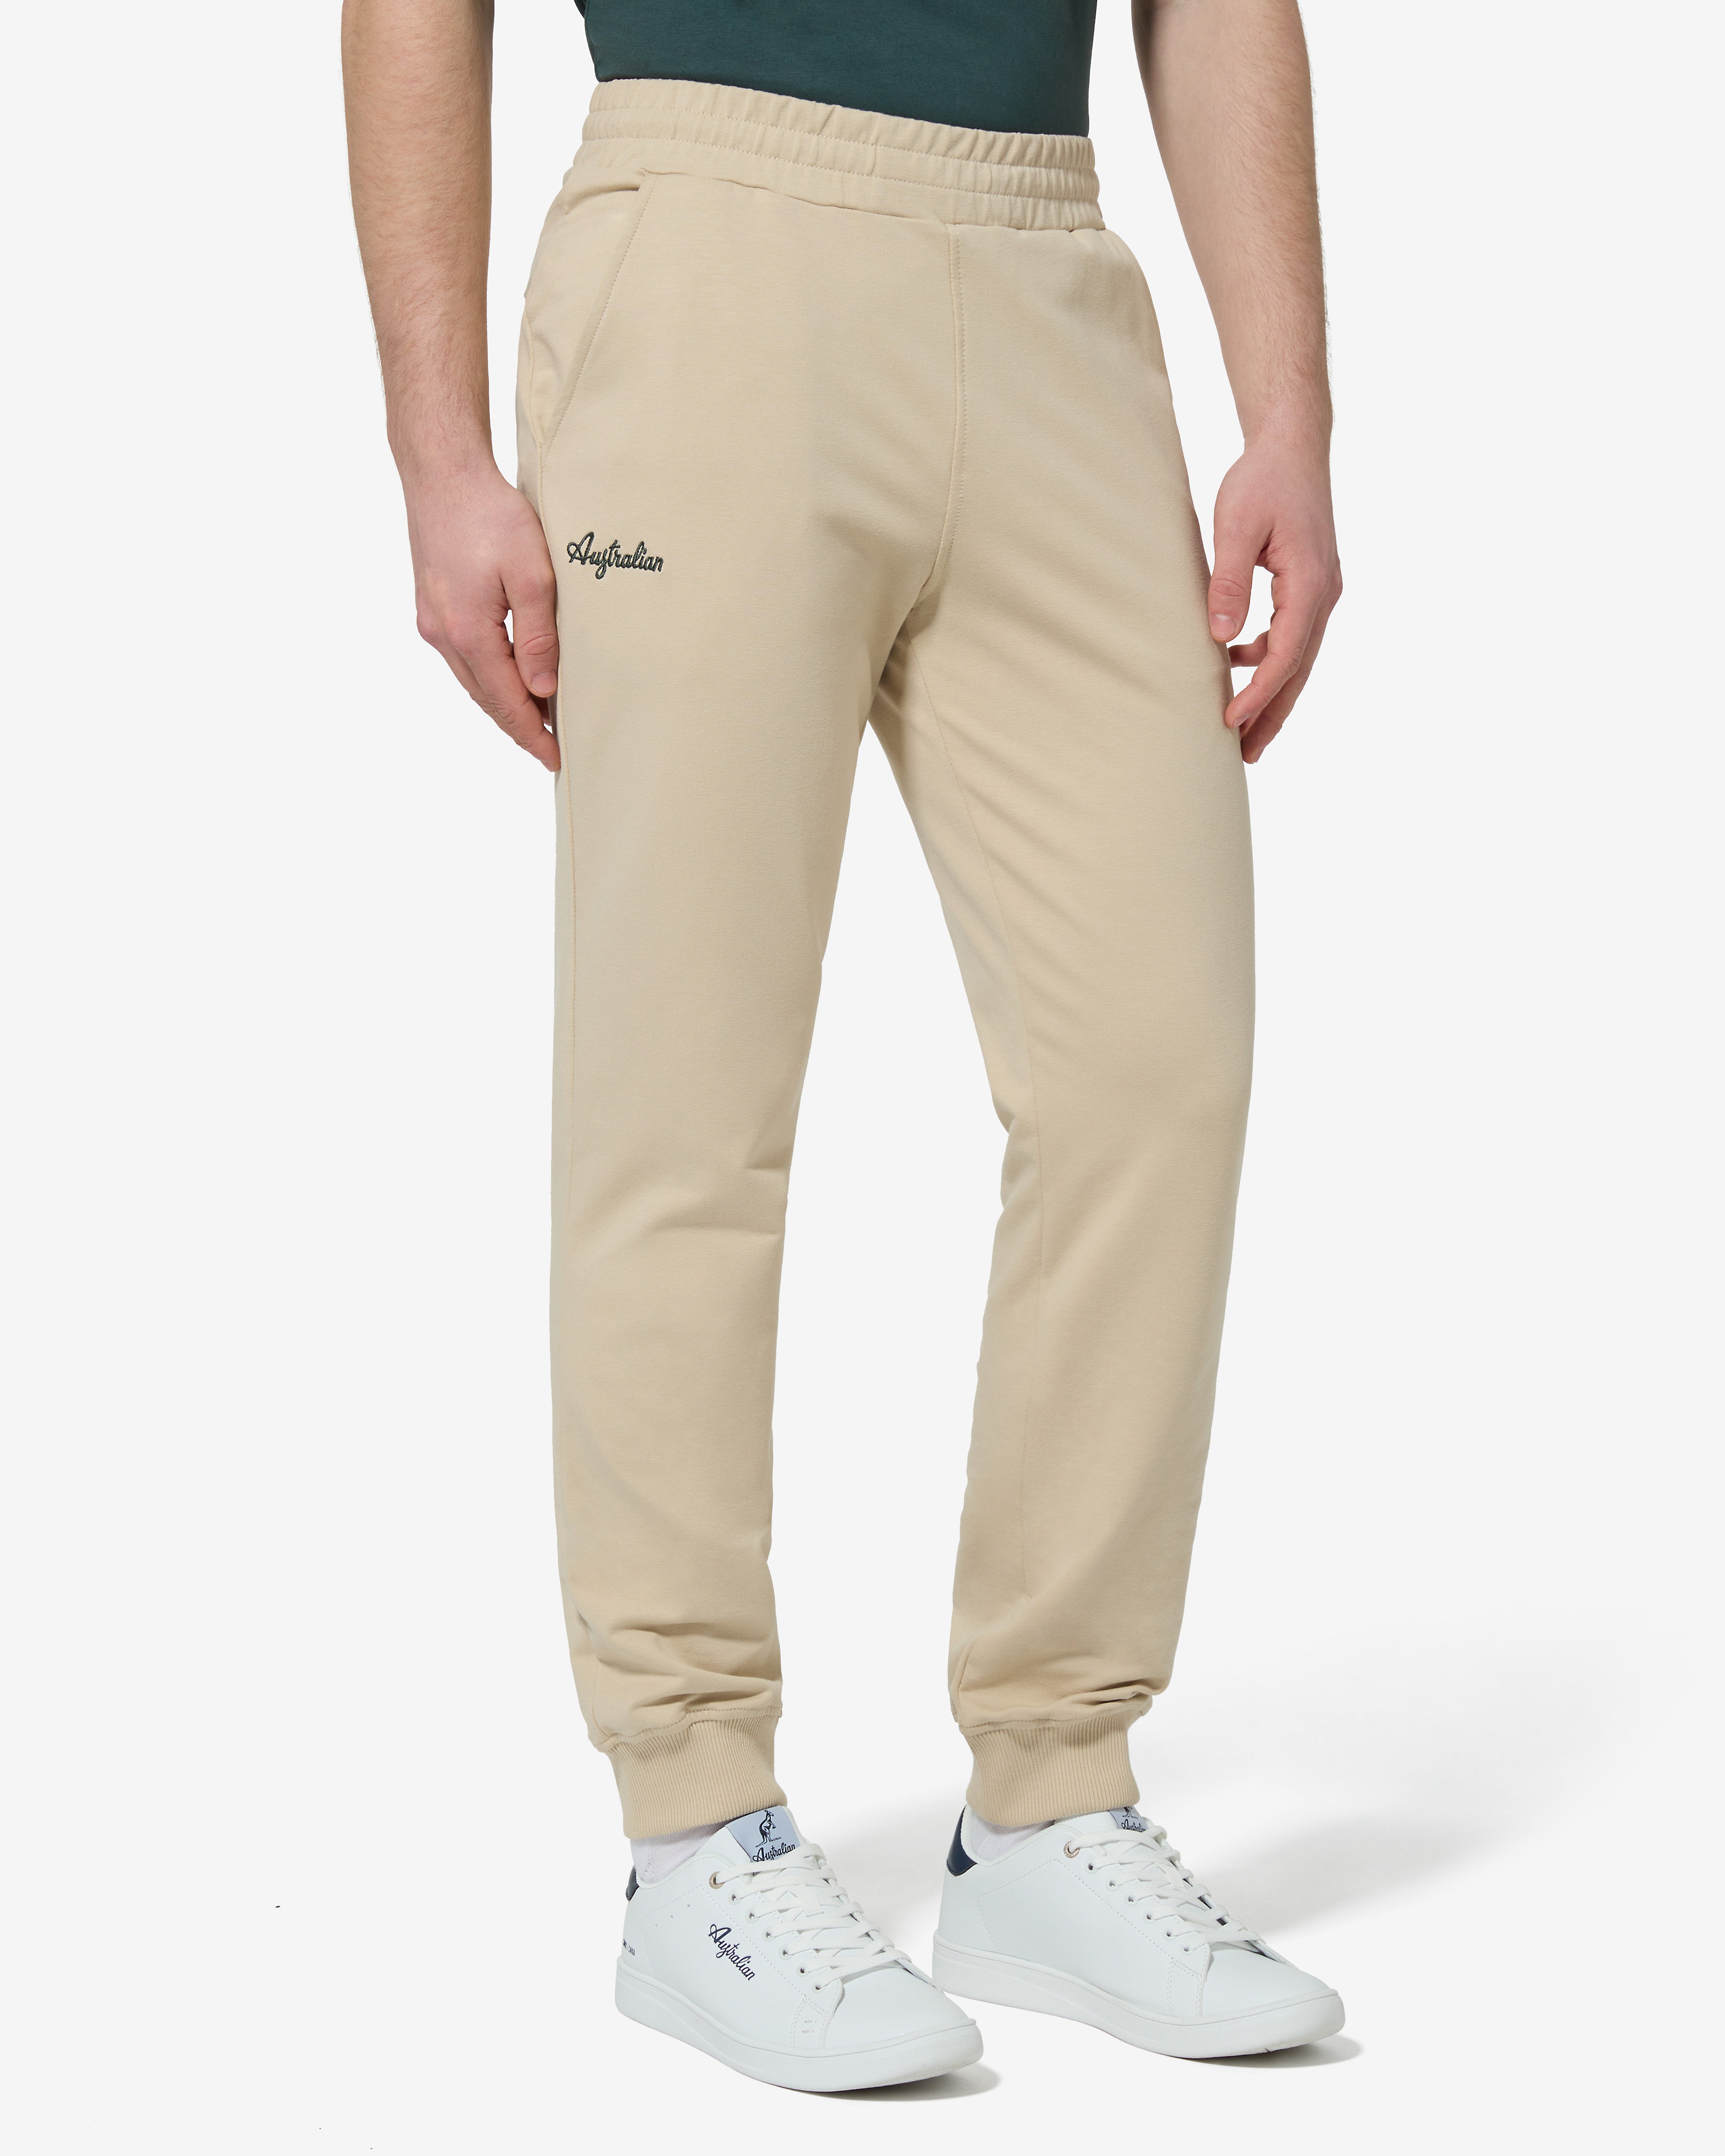 Essential Camomps Track Pant